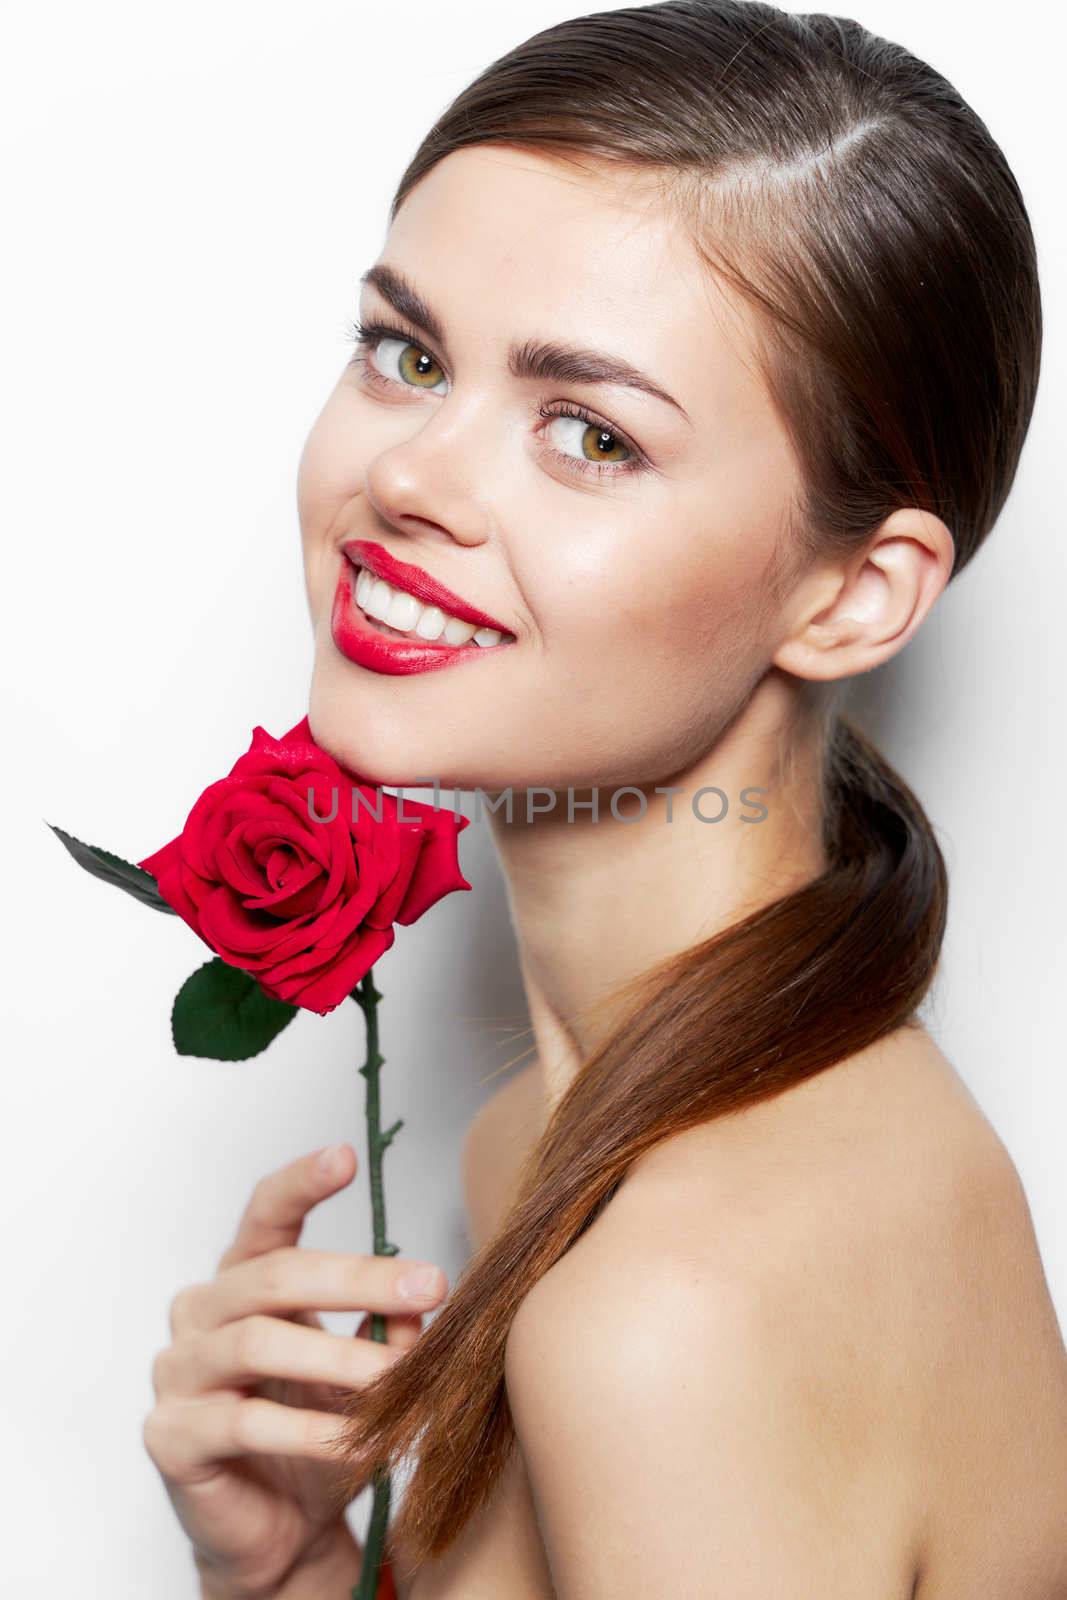 Lady with rose bright Smile flower near the face makeup background